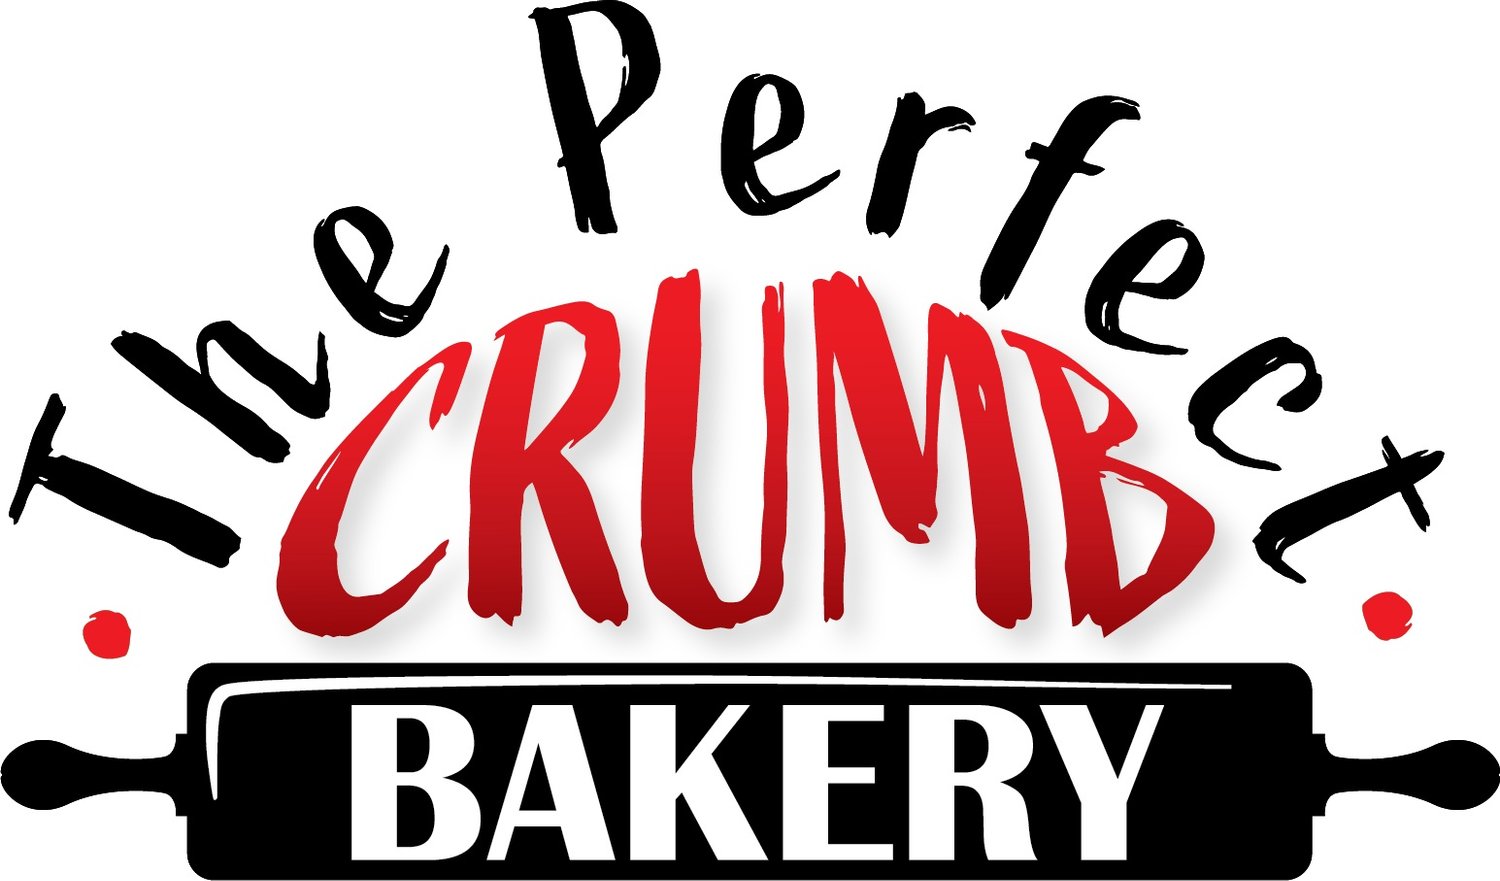 The Perfect Crumb Bakery